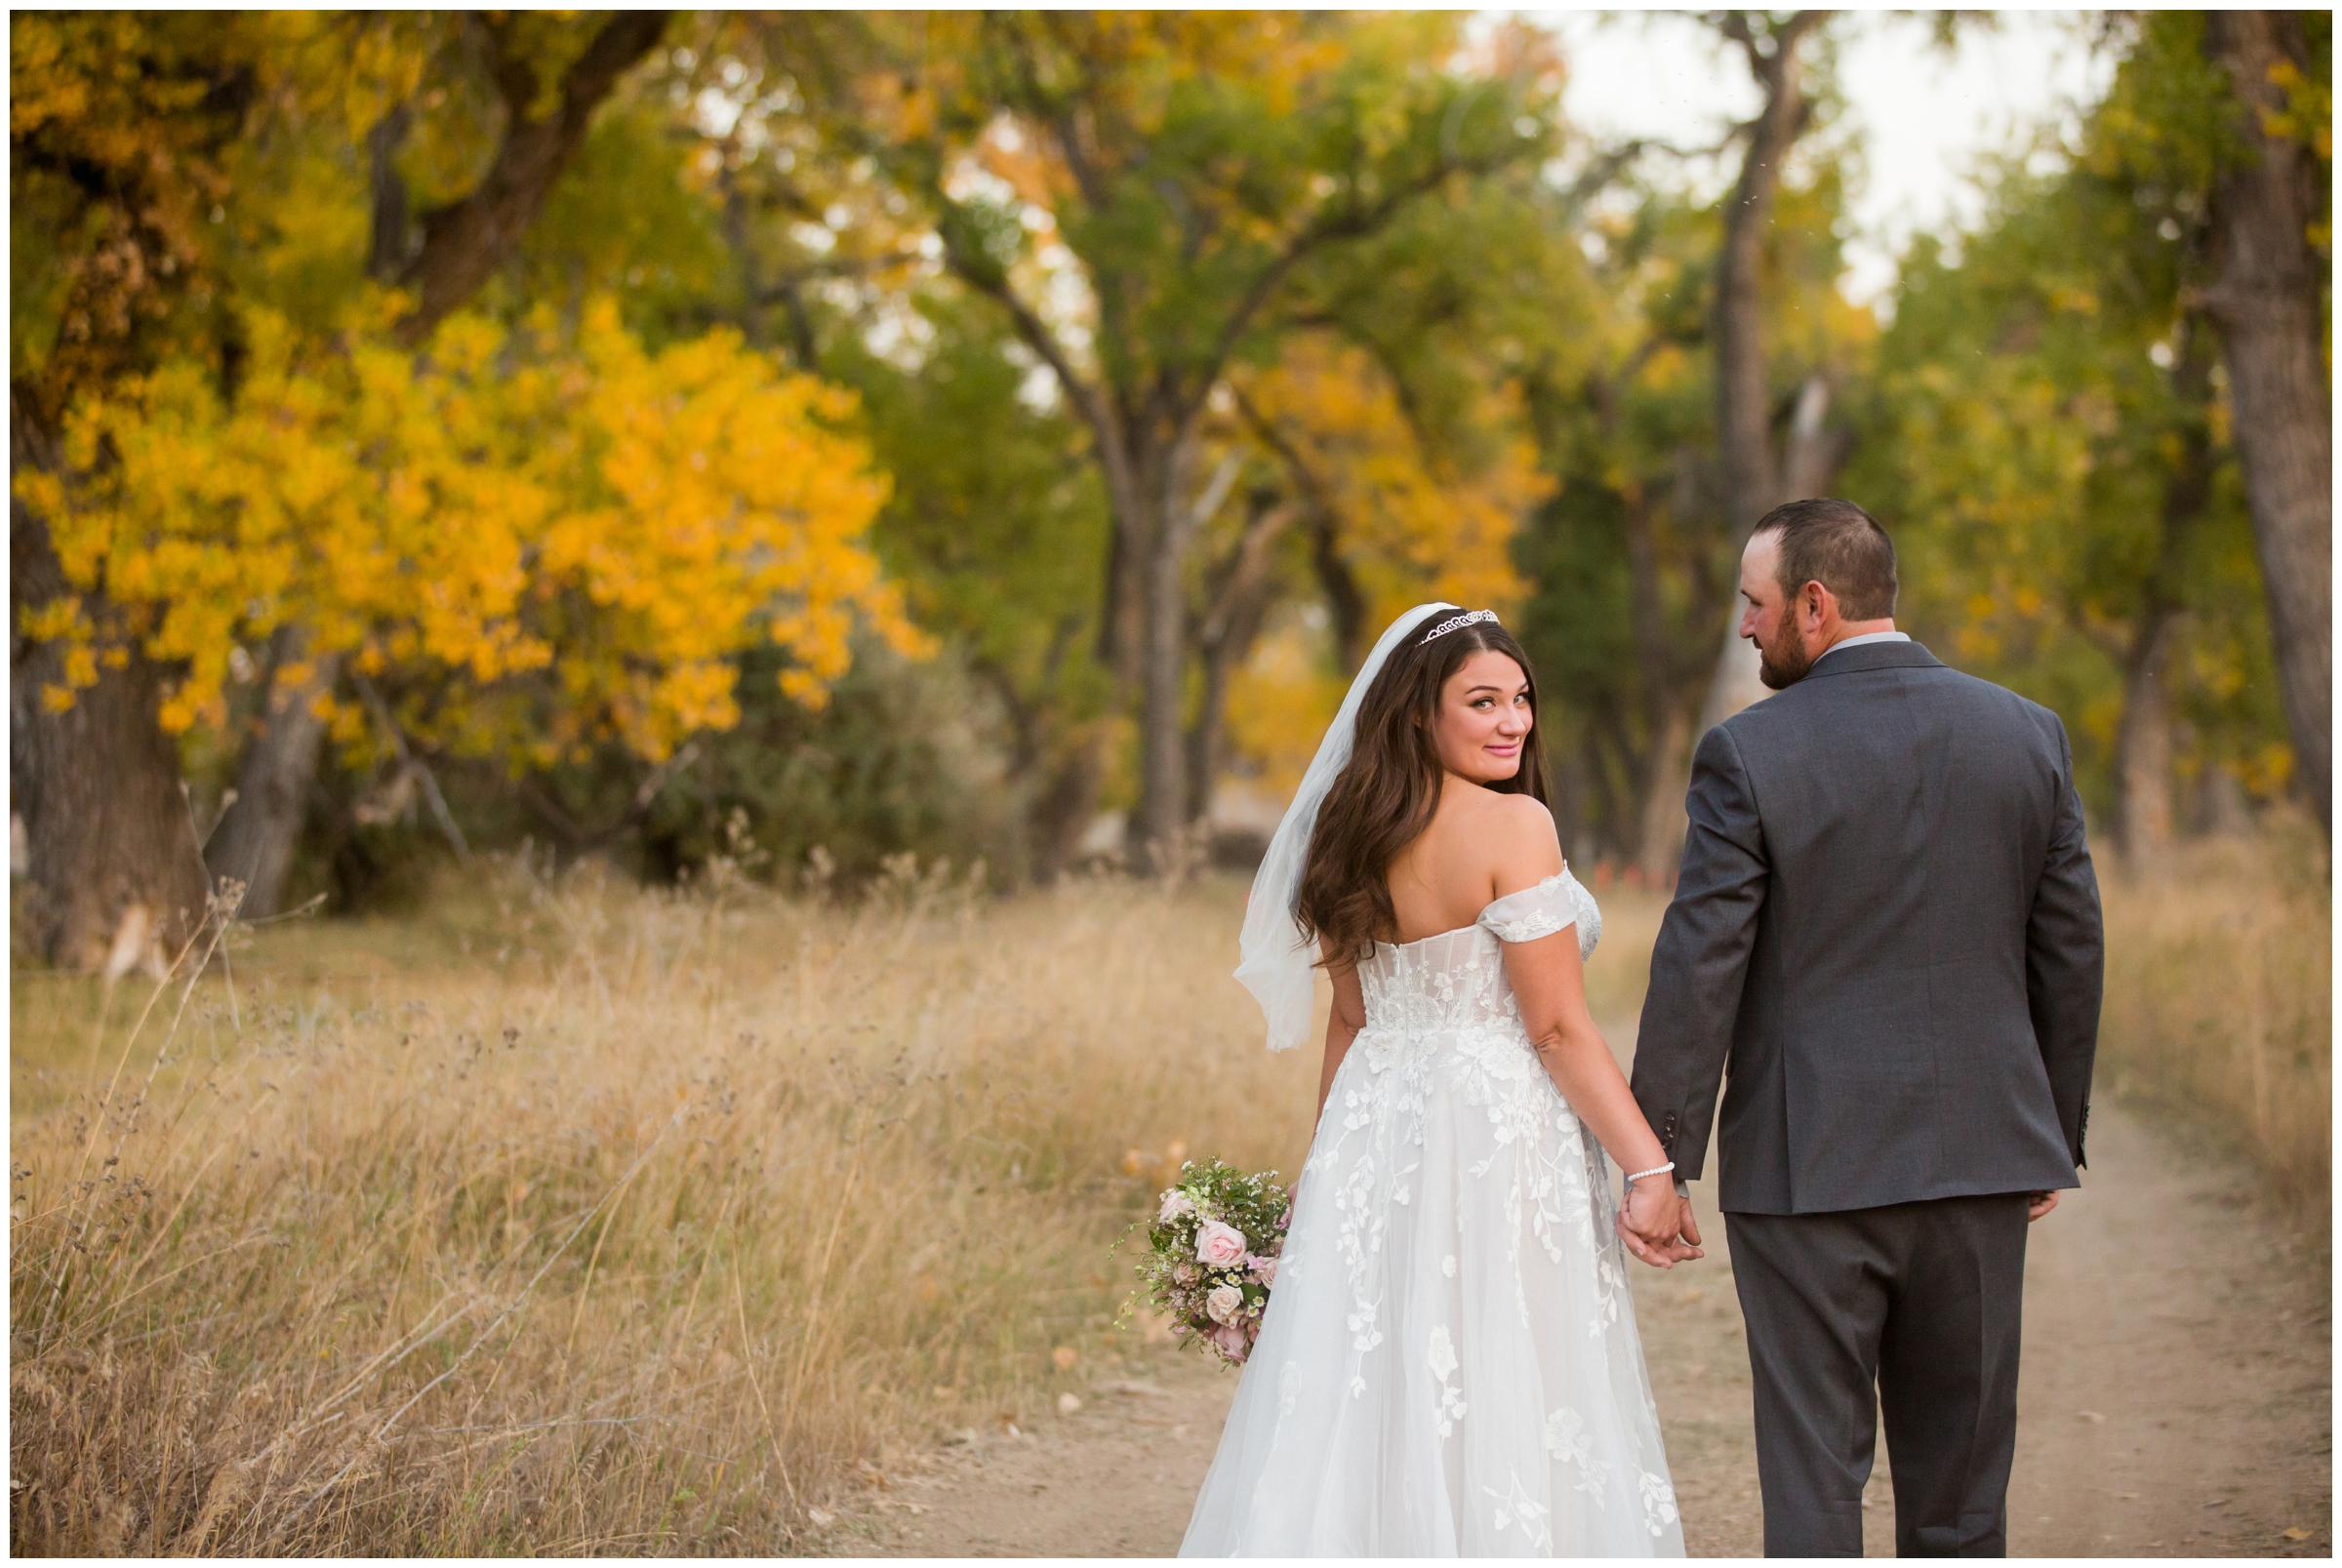 Rustic Colorado wedding photography inspiration by Platteville CO photographer Plum Pretty Photography